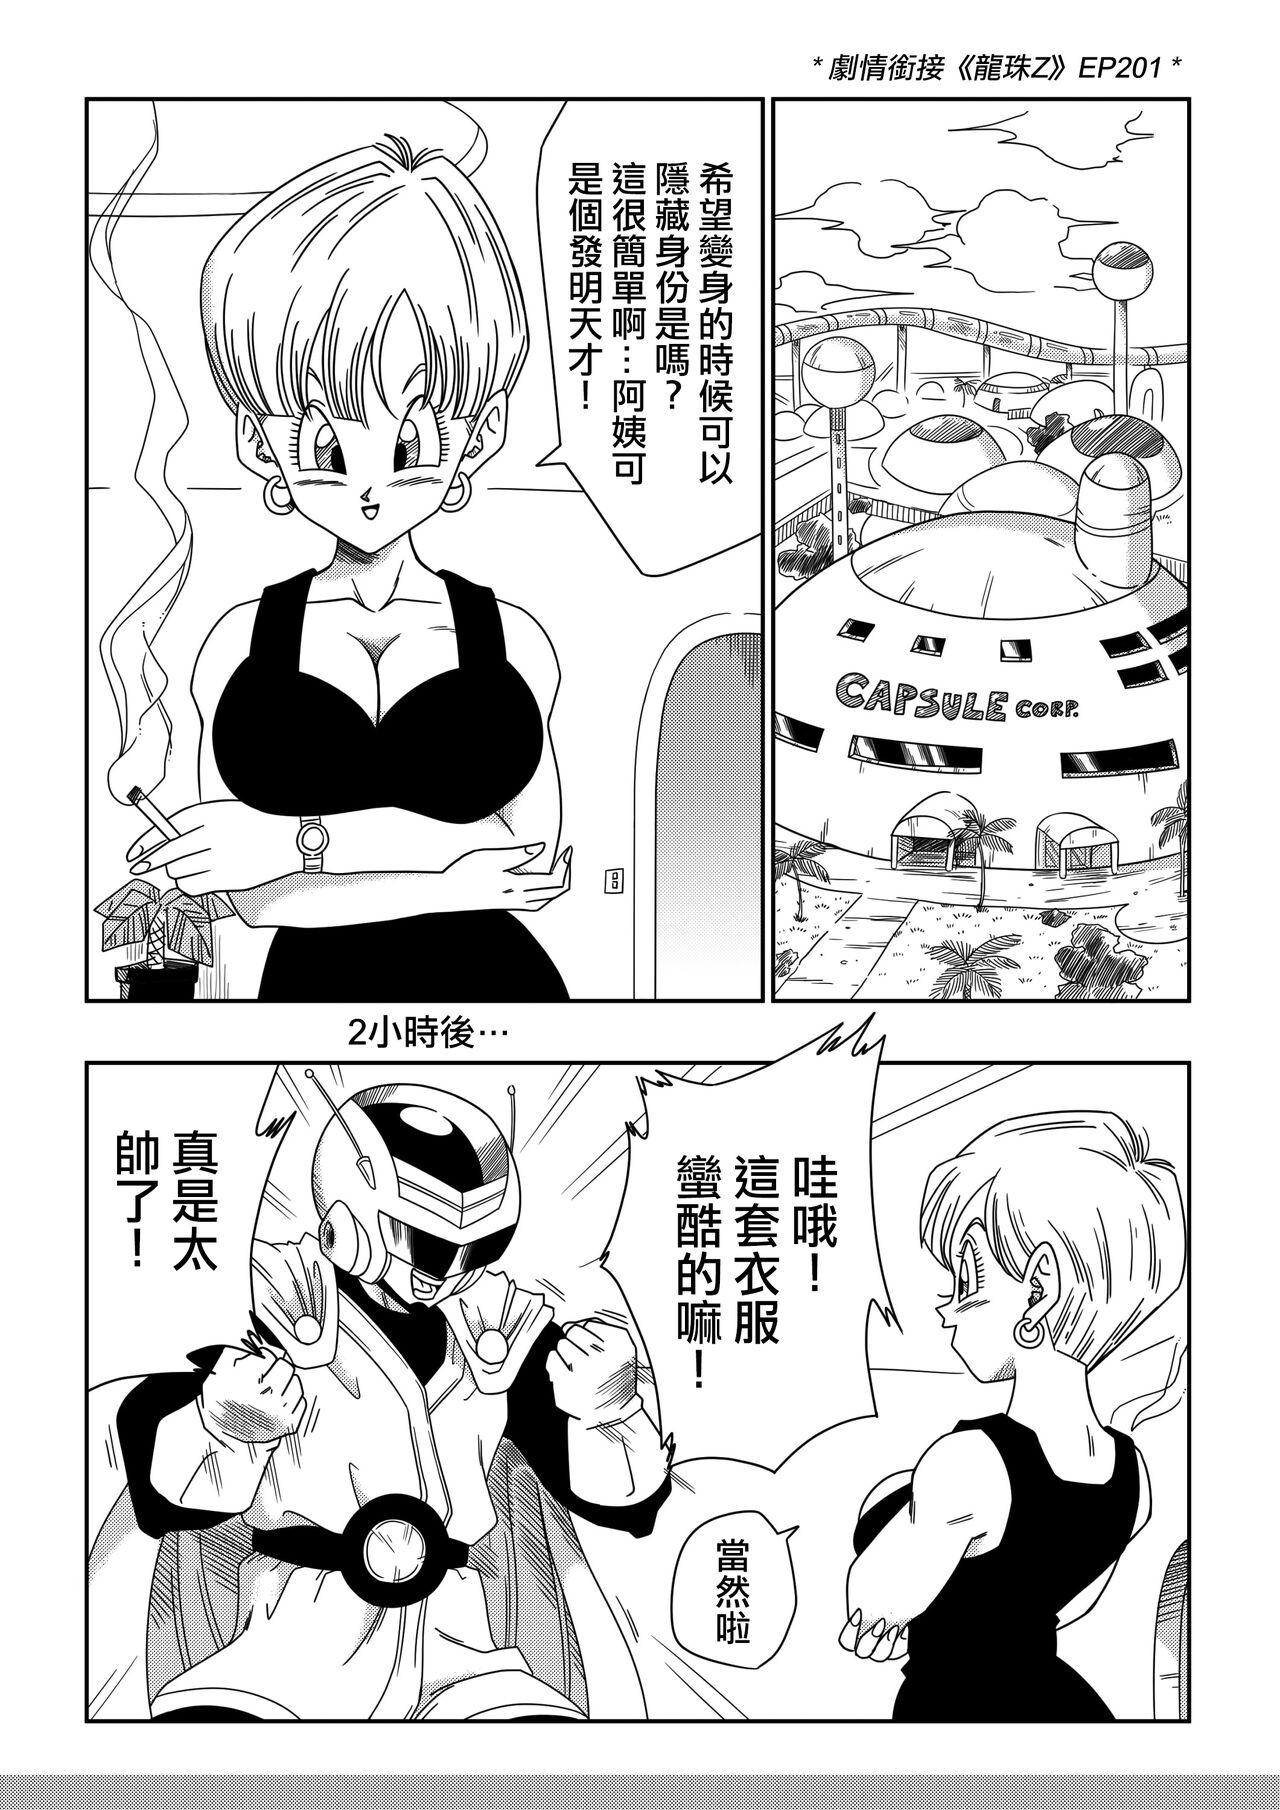 Exhibition LOVE TRIANGLE Z PART 3 - Dragon ball z Groping - Page 2